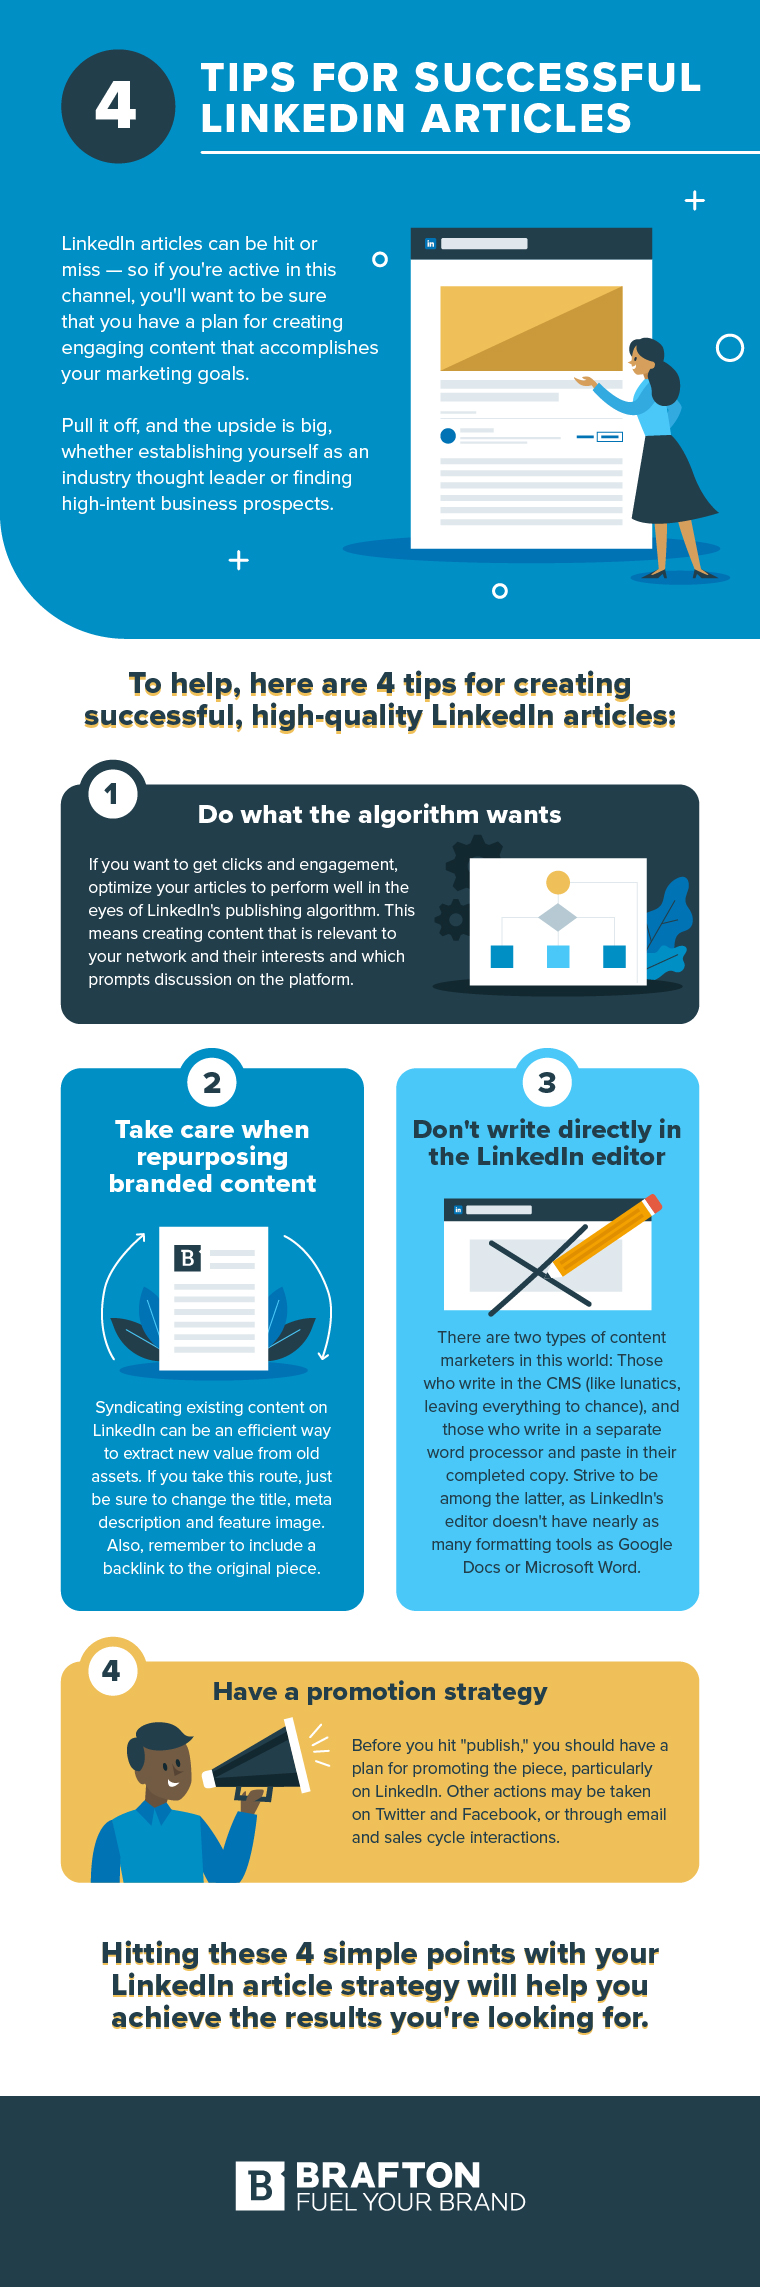 Infographic: 4 tips for successful LinkedIn articles